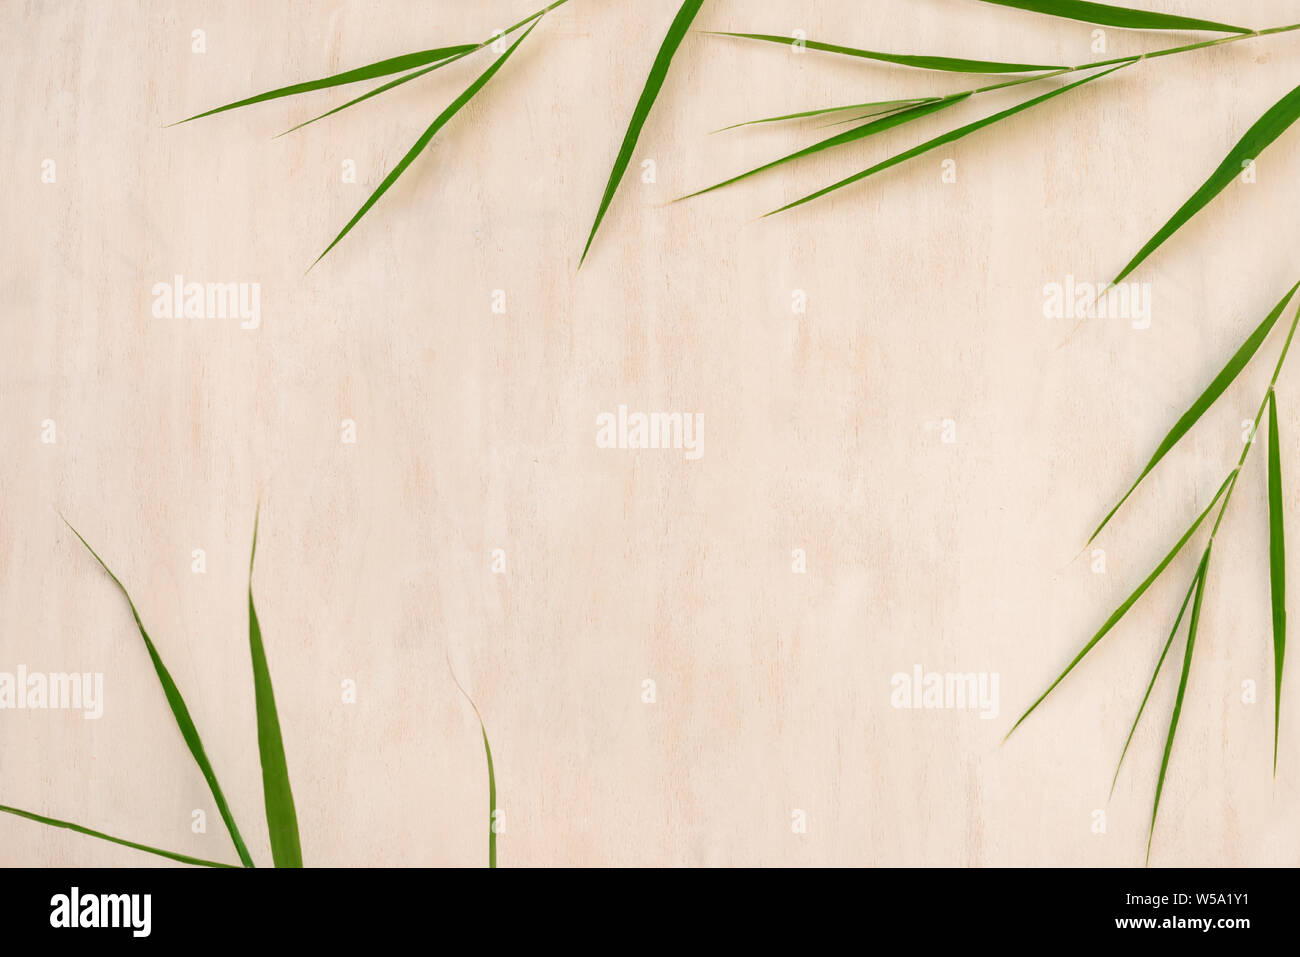 Green bamboo leaves, asian style plants, top view, copy space. Trendy bamboo leaves flat lay on white wooden background. Stock Photo